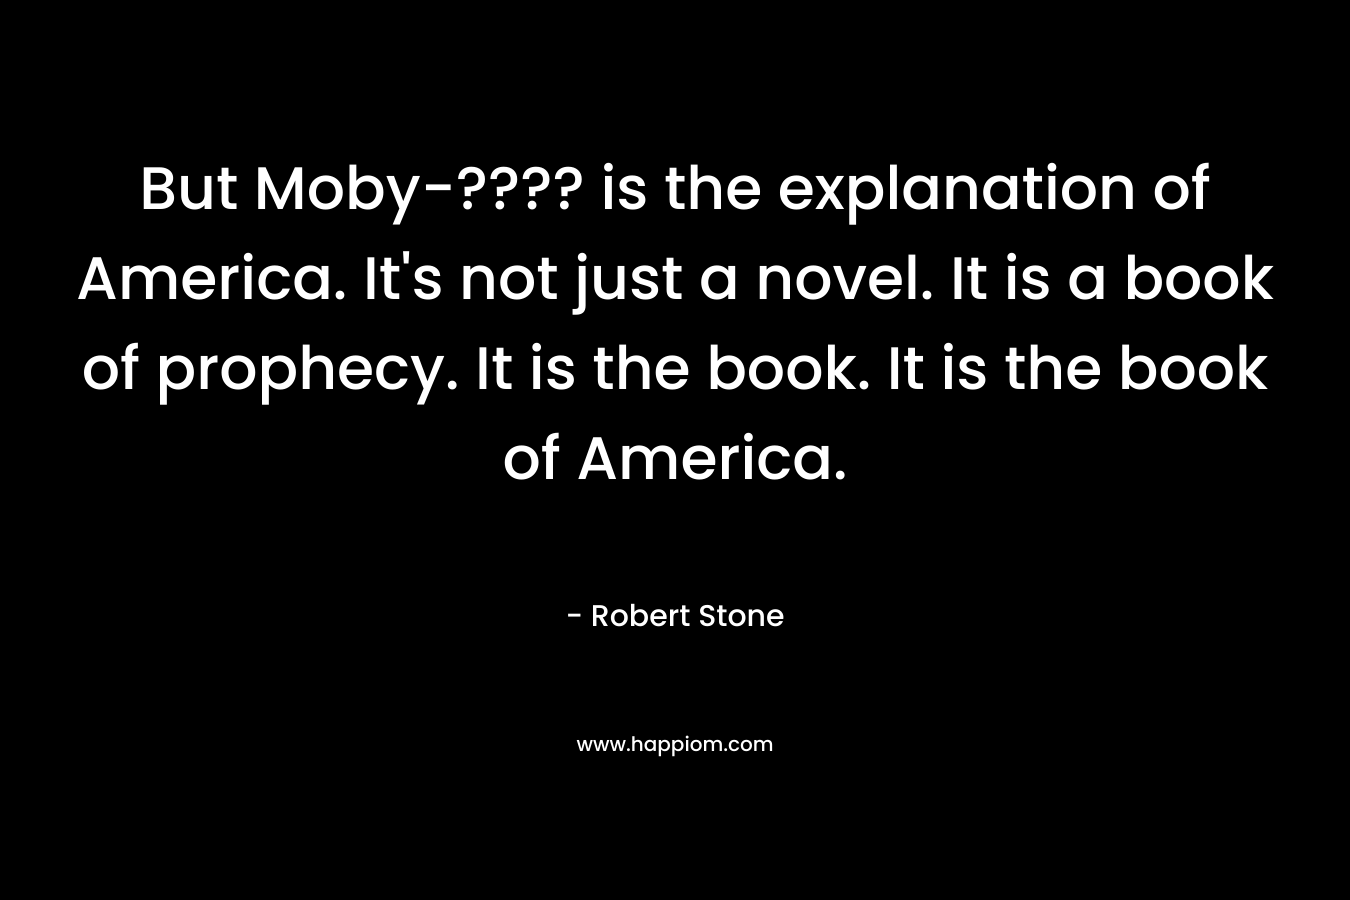 But Moby-???? is the explanation of America. It's not just a novel. It is a book of prophecy. It is the book. It is the book of America.